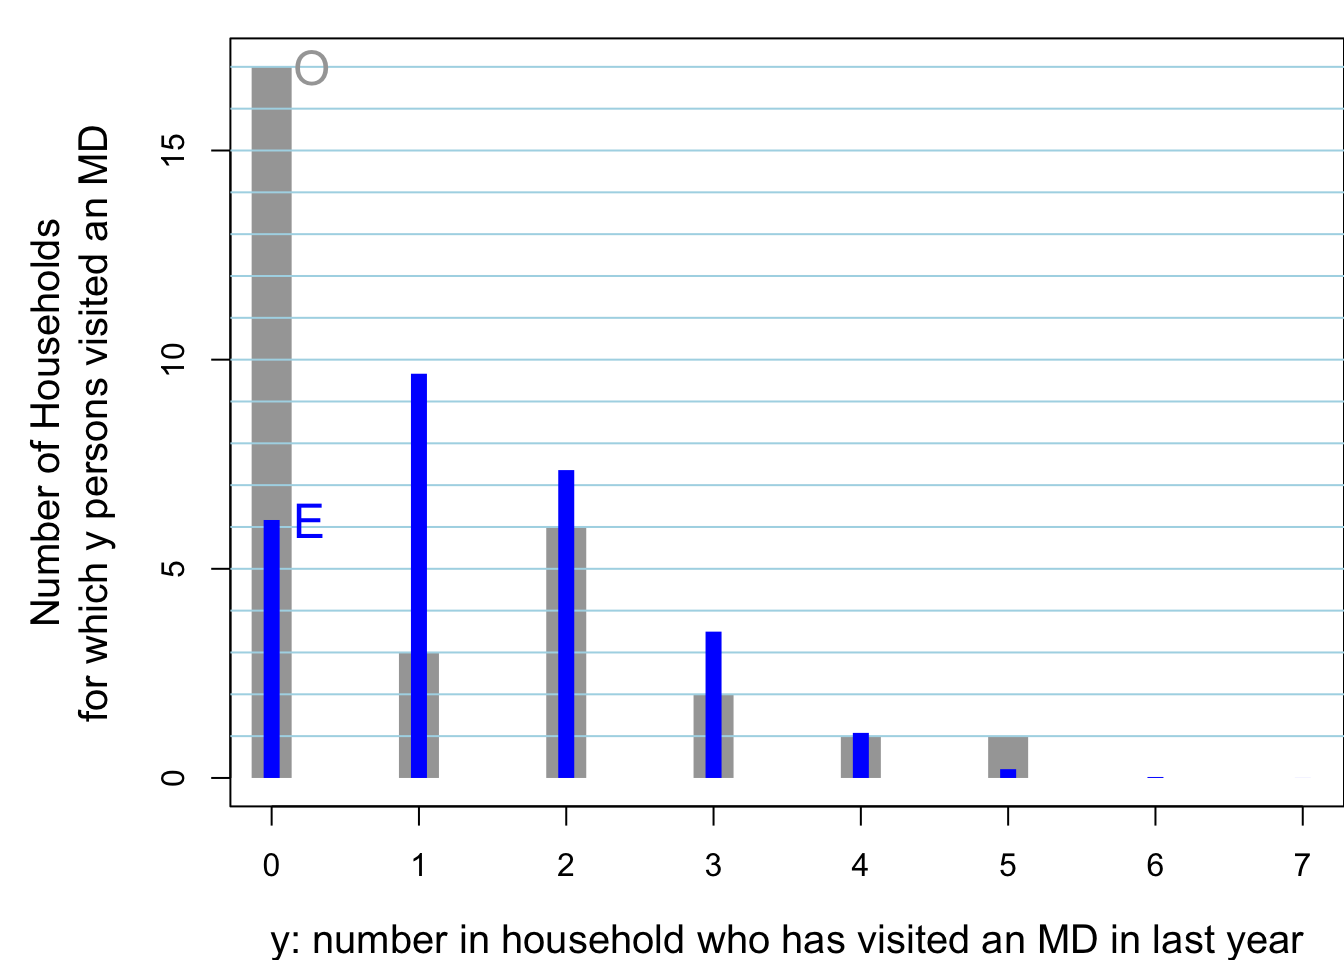 Of 30 randomly sampled households, (O)bserved  numbers of households, shown in grey, where 0, 1, .. in household had visited  a physician in the previous year. The 30 households contained 104 persons, 28 of whom had visited a physician in the previous year. Also shown, in blue are the (E)xpected numbers of households, assuming the data were generated from 104 independent Bernoulli random variables, each with the same  probability 28/104. The observed variance is considerably LARGER than that predicted by a binomial distribution. You would see this even if the individuals in the house were not from the same family. For example, if the occupants were students, the proportion of them with such a history would be different (?lower) than if the occupants were older: this is the 'non-identical probabilities' aspect. The other possibility, the 'non-independence' aspect, is that health status and the seeking medical care are affected by shared family factors, such as behaviours, attitudes, lifestyle, and insurance coverage.